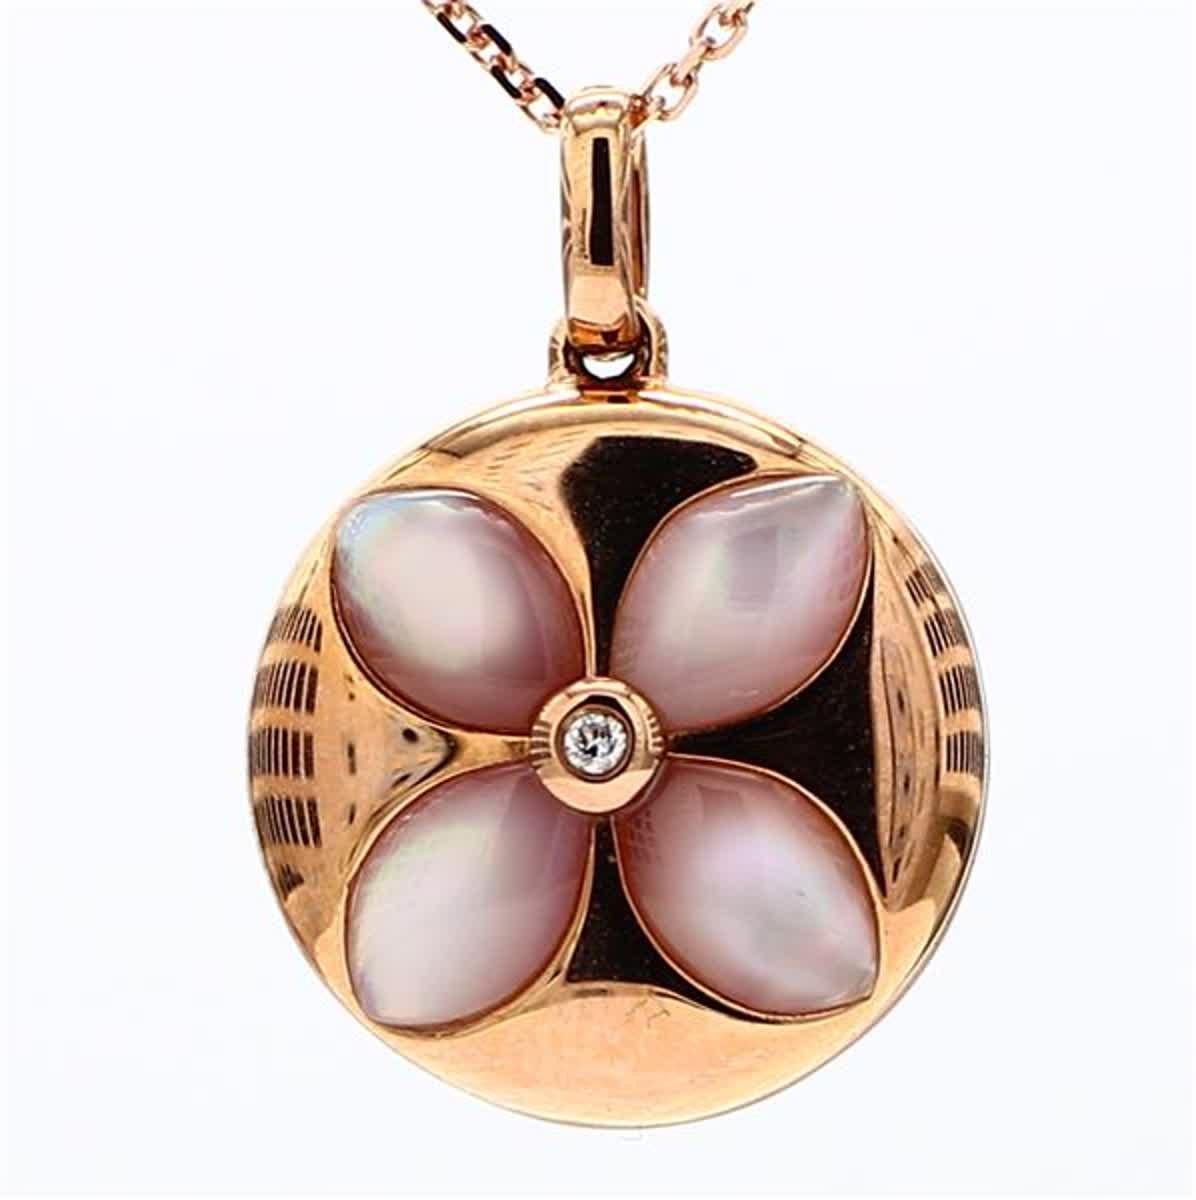 RareGemWorld's classic pink shell and pearl pendant. Mounted in a beautiful 18K Rose Gold setting with a natural pearl and a natural pink shell. The center pieces are complimented by a natural round white diamond. This pendant is guaranteed to